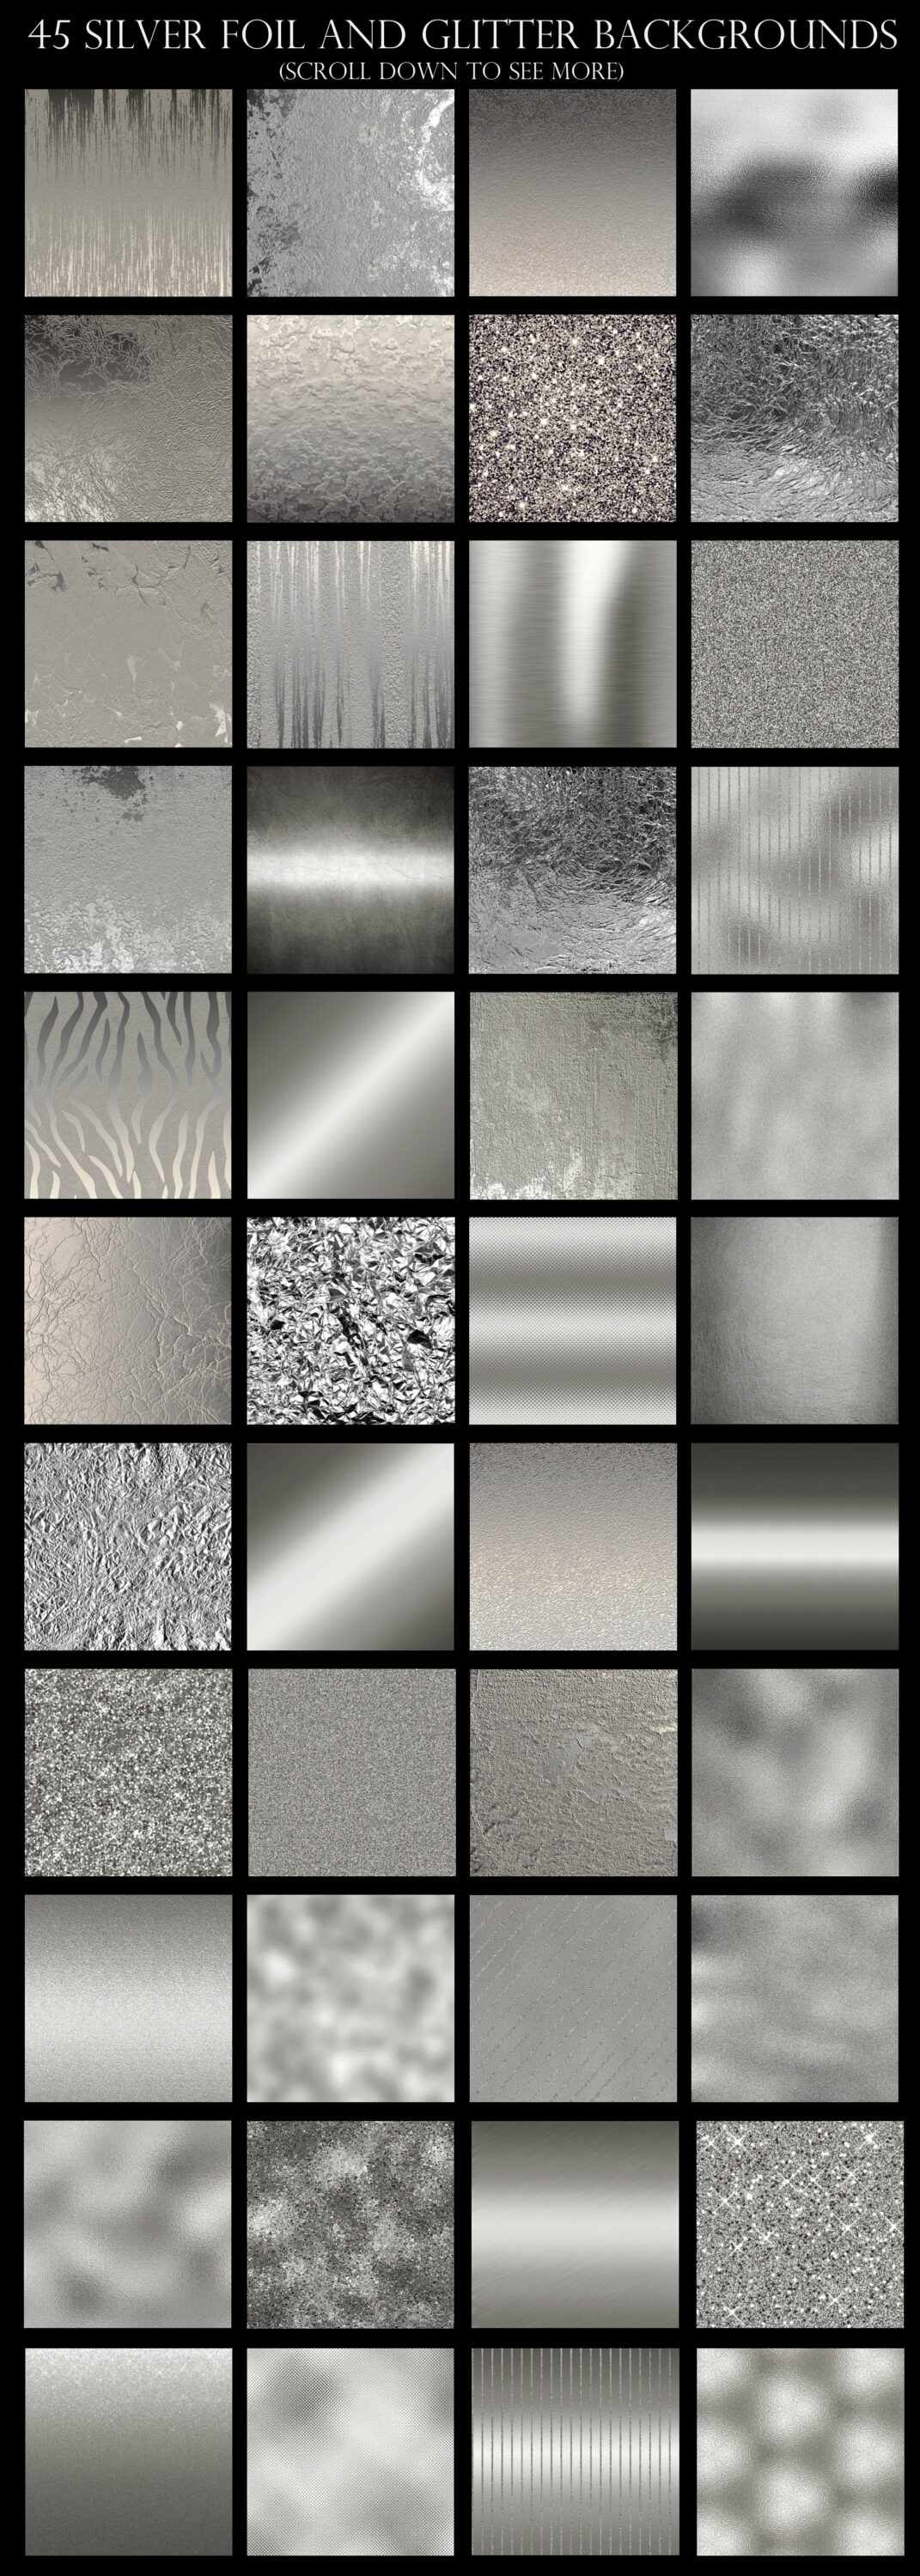 Set of silver foil and glitter backgrounds.